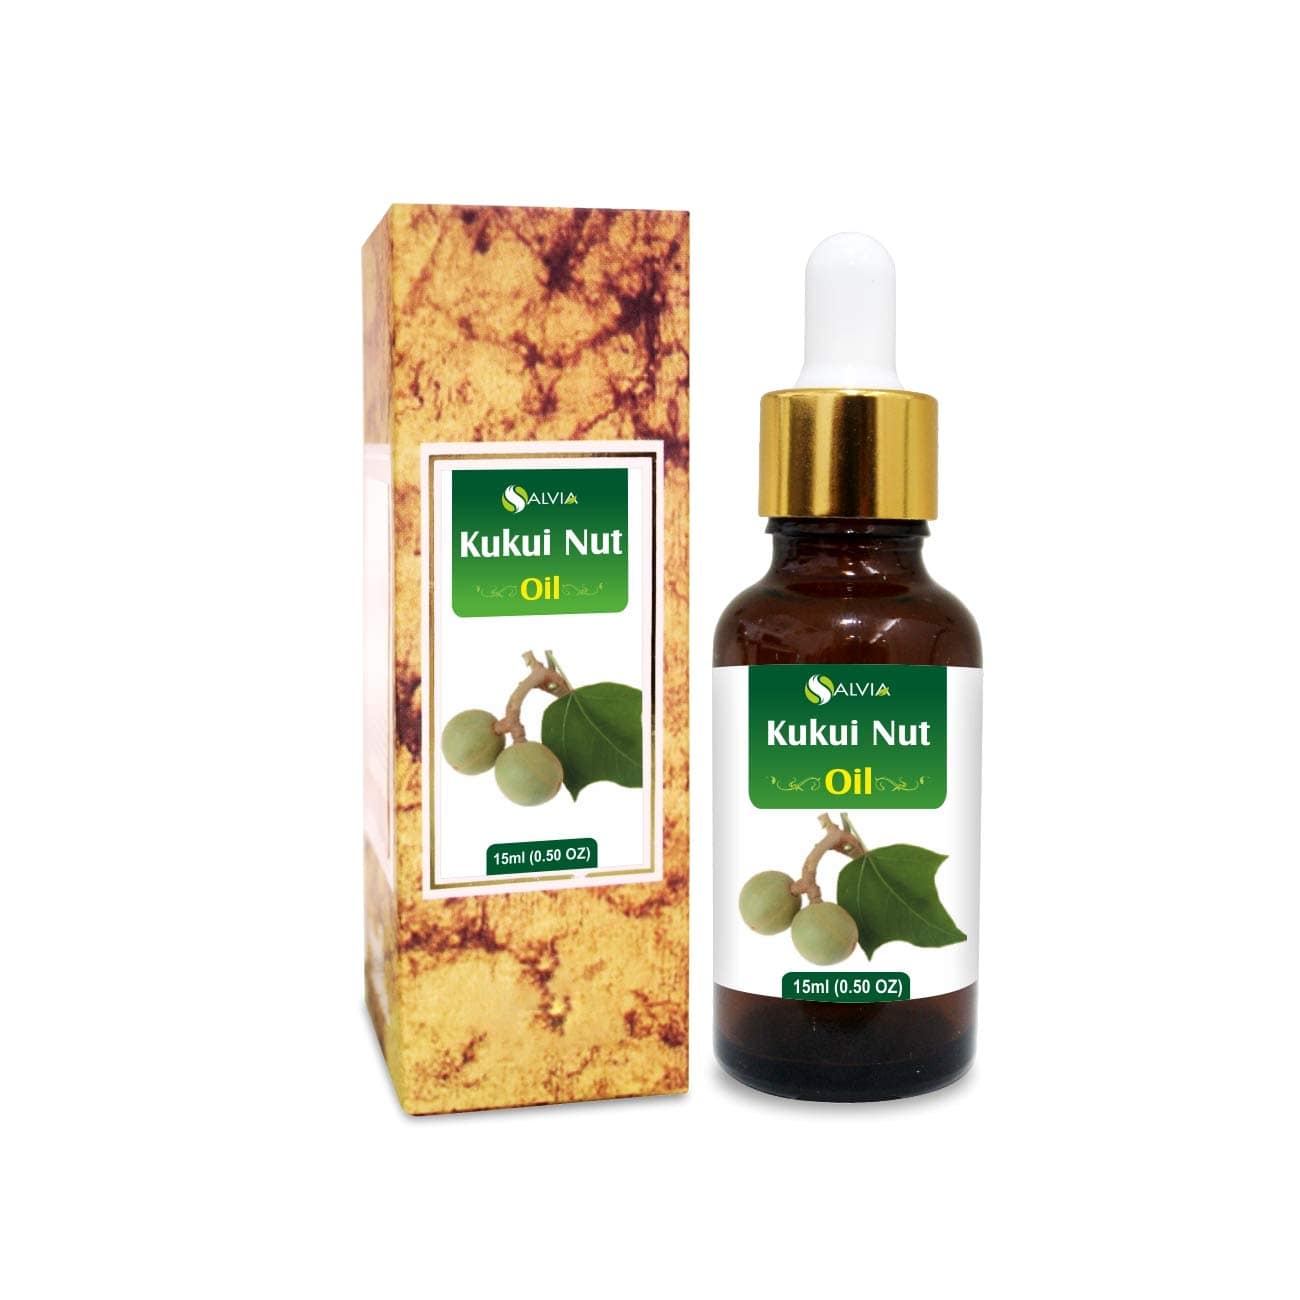 Salvia Natural Carrier Oils,Anti Ageing,Anti-ageing Oil 10ml Kukui Nut (Aleurites Moluccans) Oil 100% Natural Pure Carrier Oil Moistures & Hydrates Skin, Anti-Aging Properties, Collagen Production & More